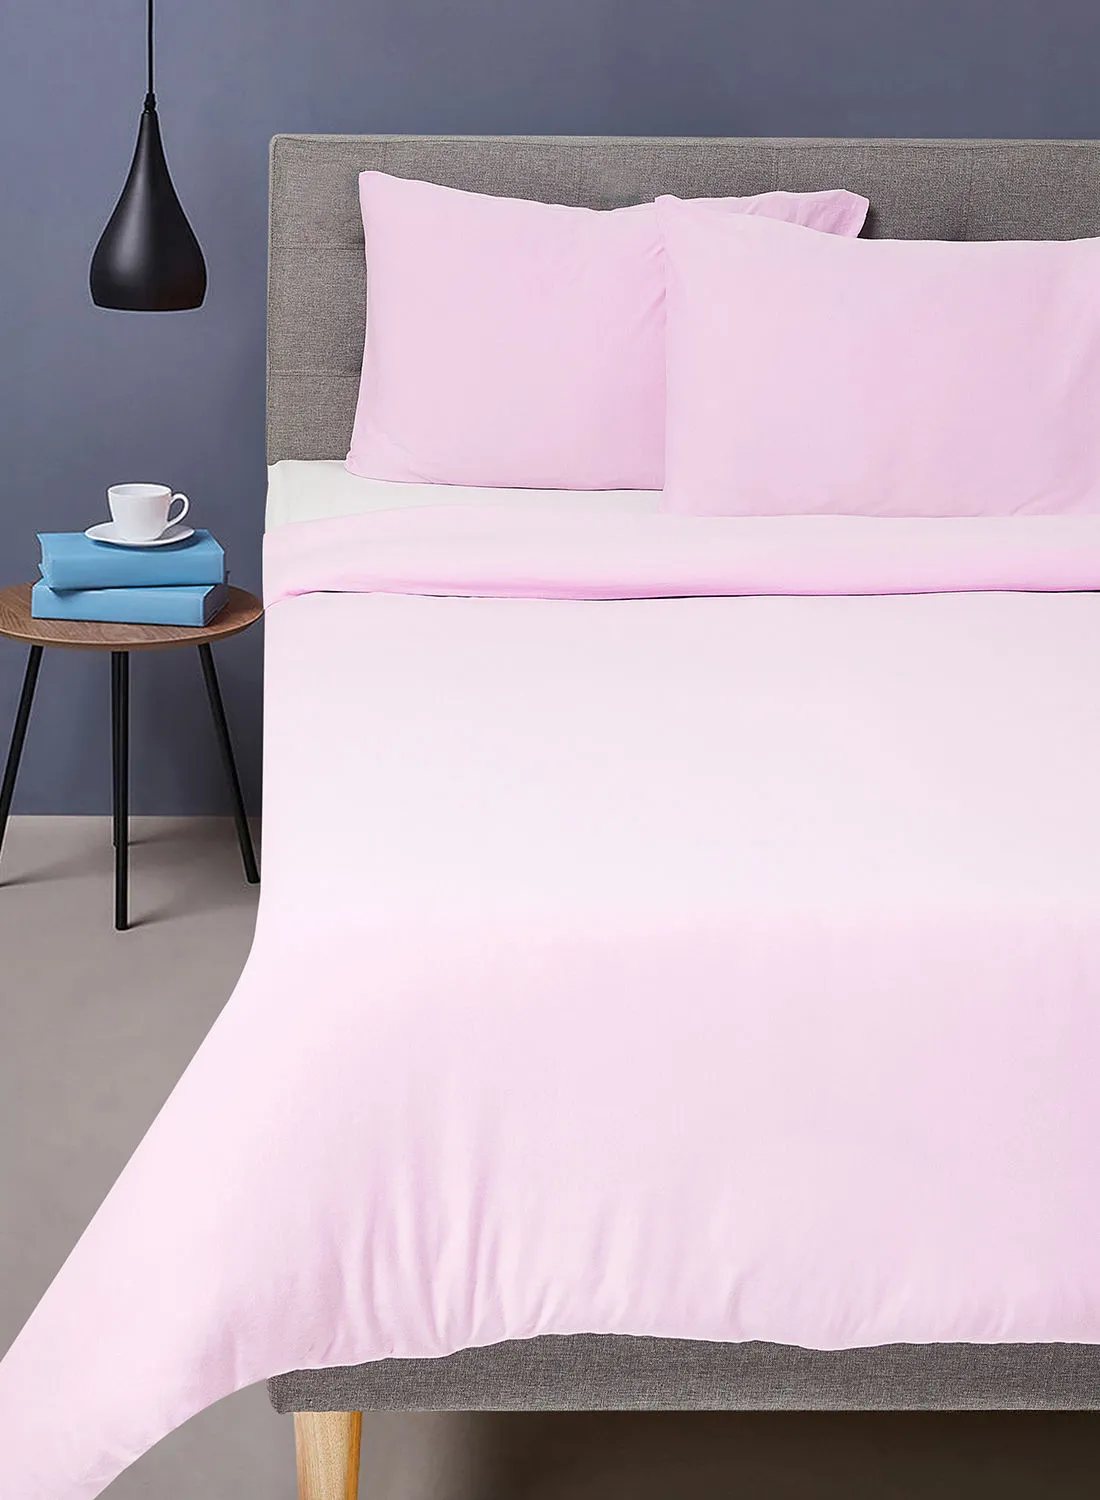 Noon East Duvet Cover Set- With 1 Duvet Cover 160X200 Cm And 2 Pillow Cover 48X74+12 Cm - For Twin Size Mattress - 100% Cotton 140 GSM Elderberry Twin